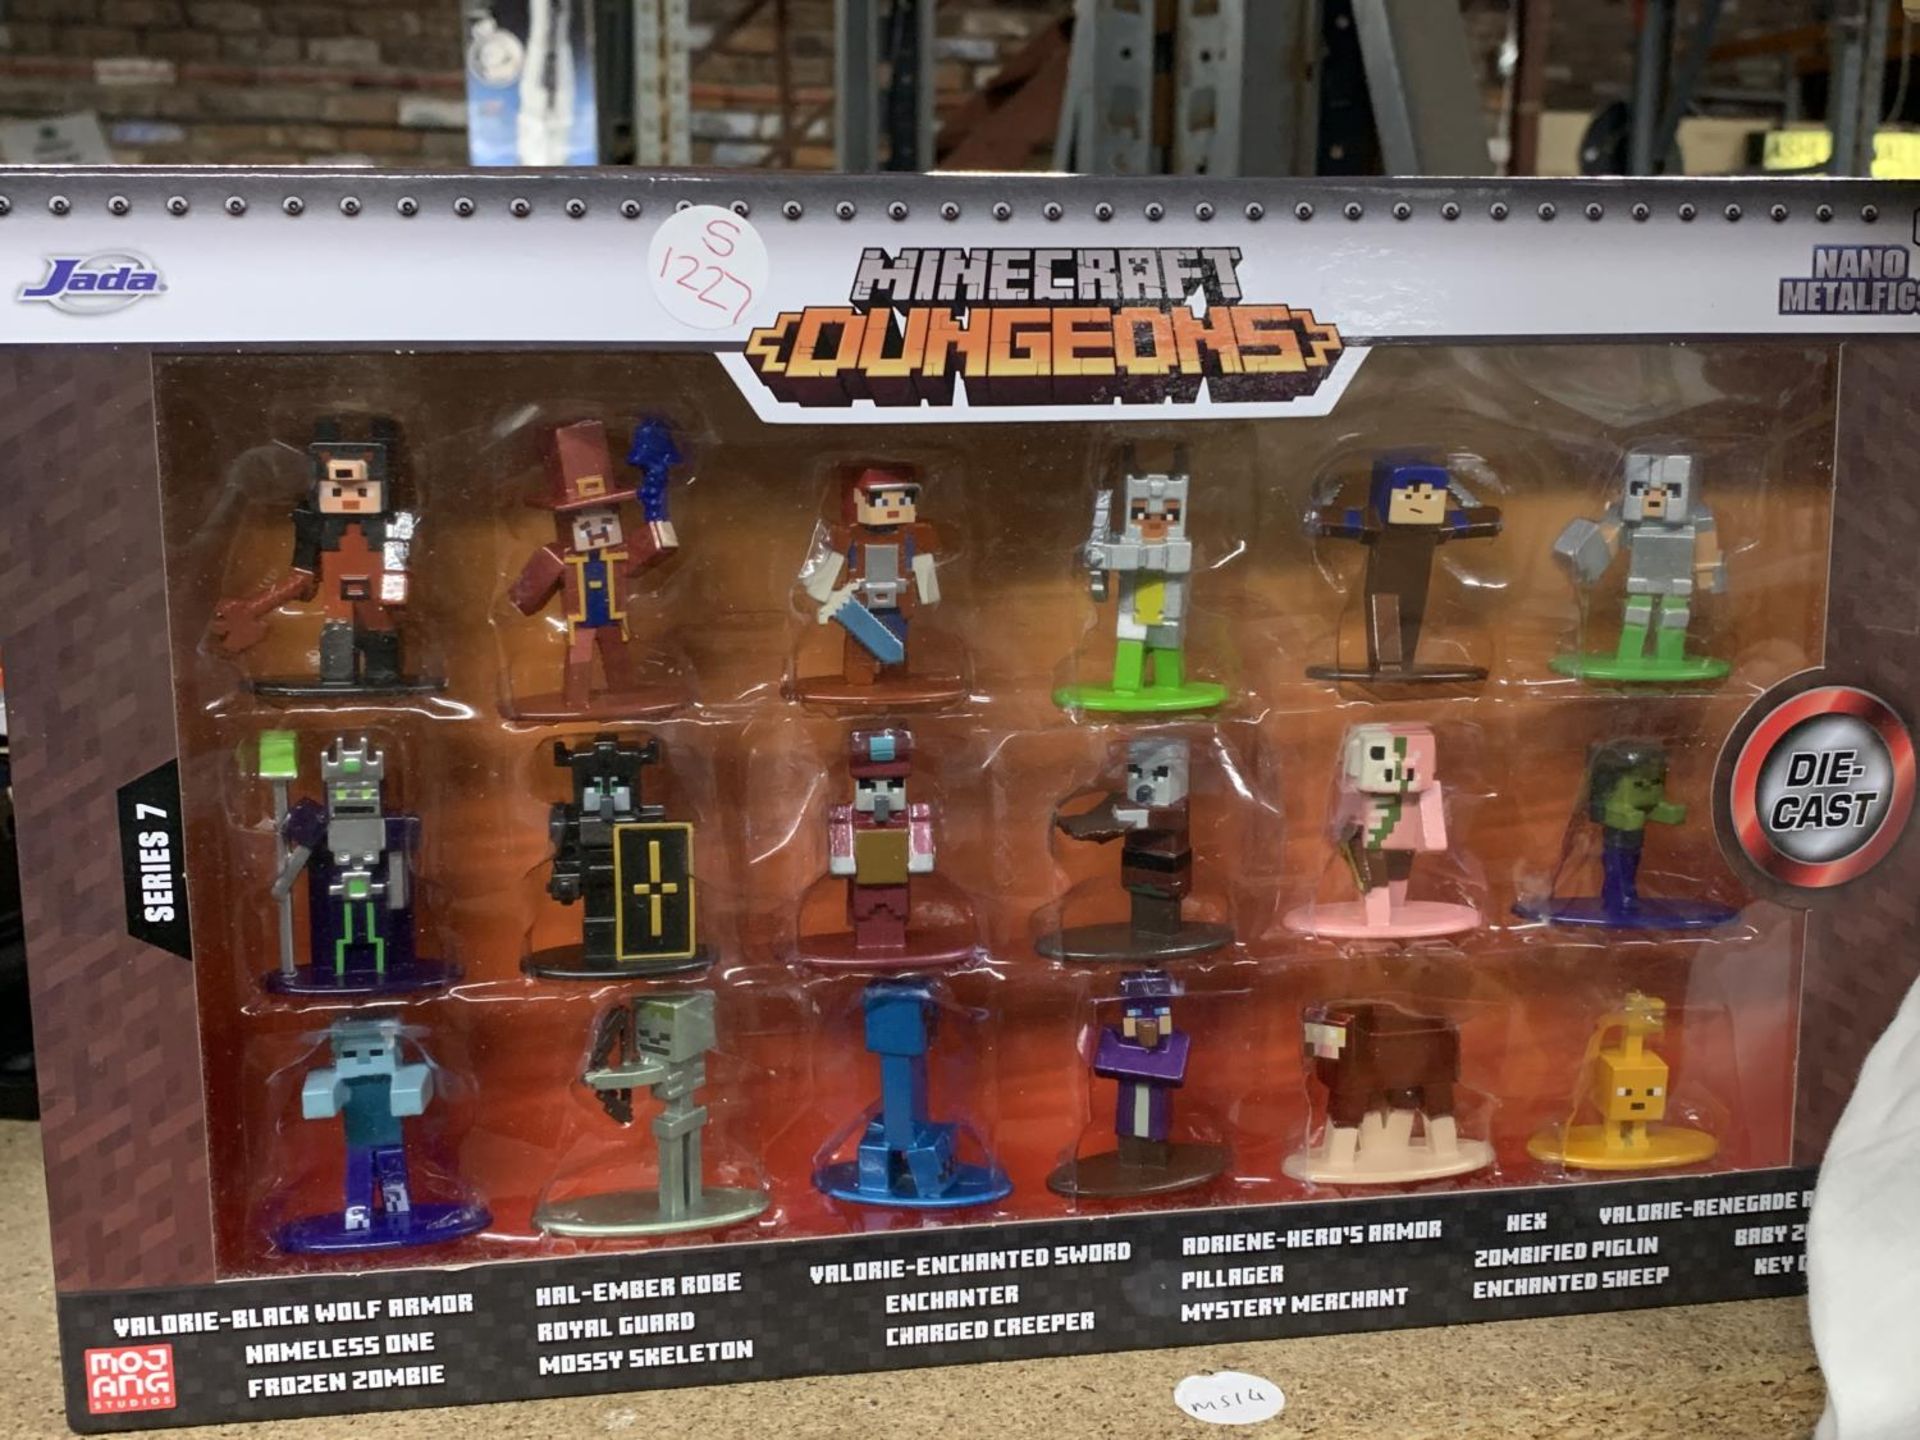 A SET OF MINECRAFT DUNGEONS FIGURES - AS NEW IN BOX